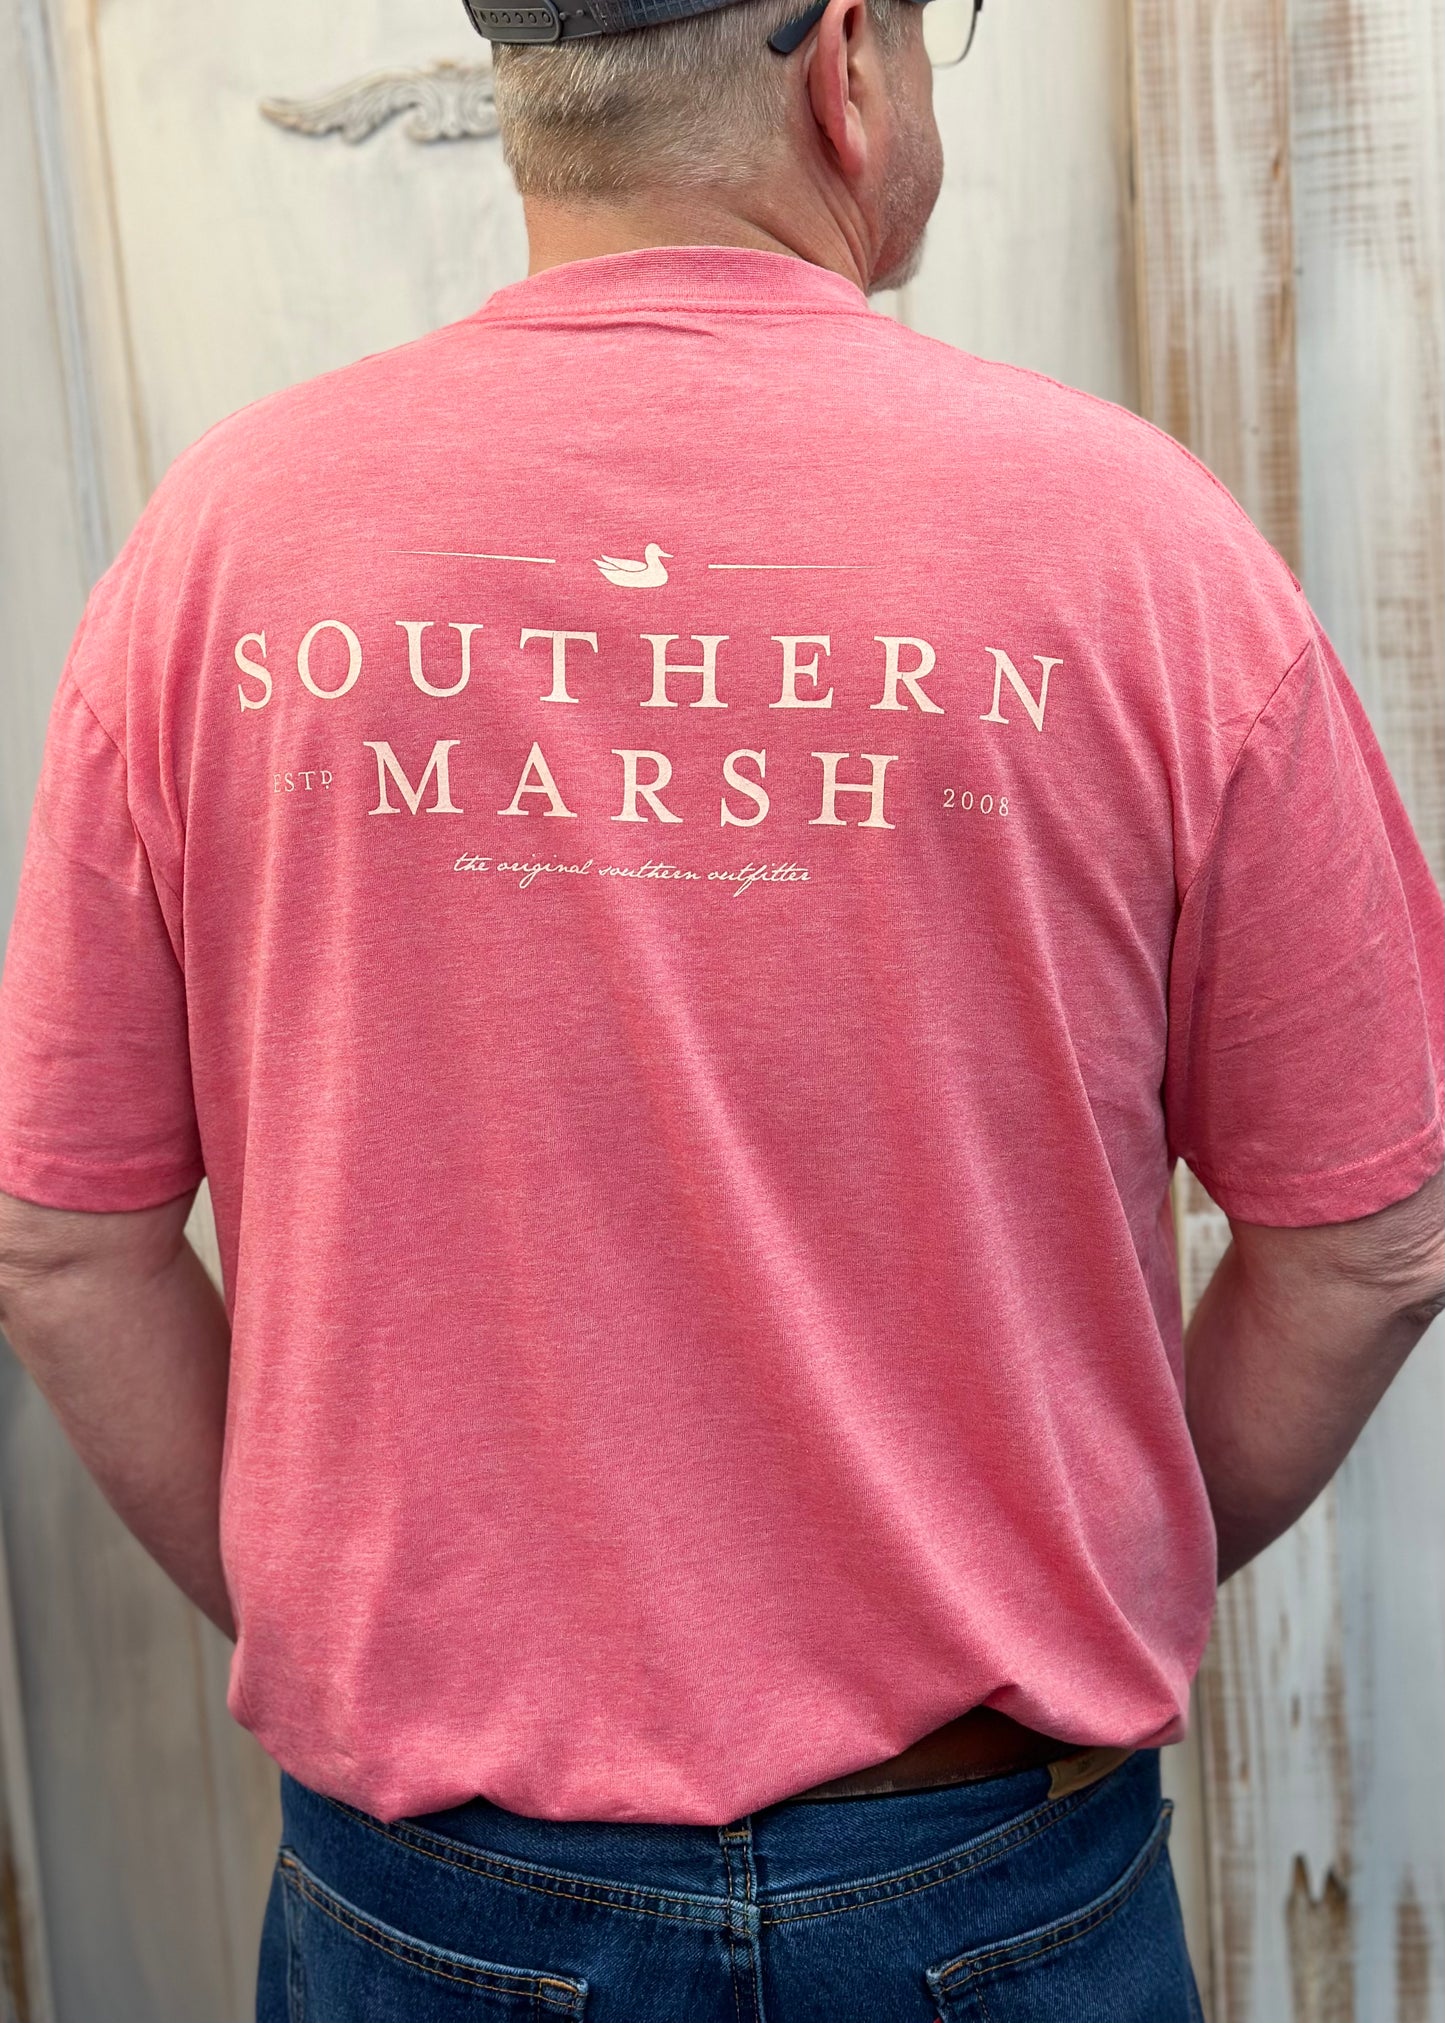 Jim wearing Southern Marsh Seawash Tee - Classic - Strawberry Fizz - Back View. Jimberly's Boutique Olive Branch MS